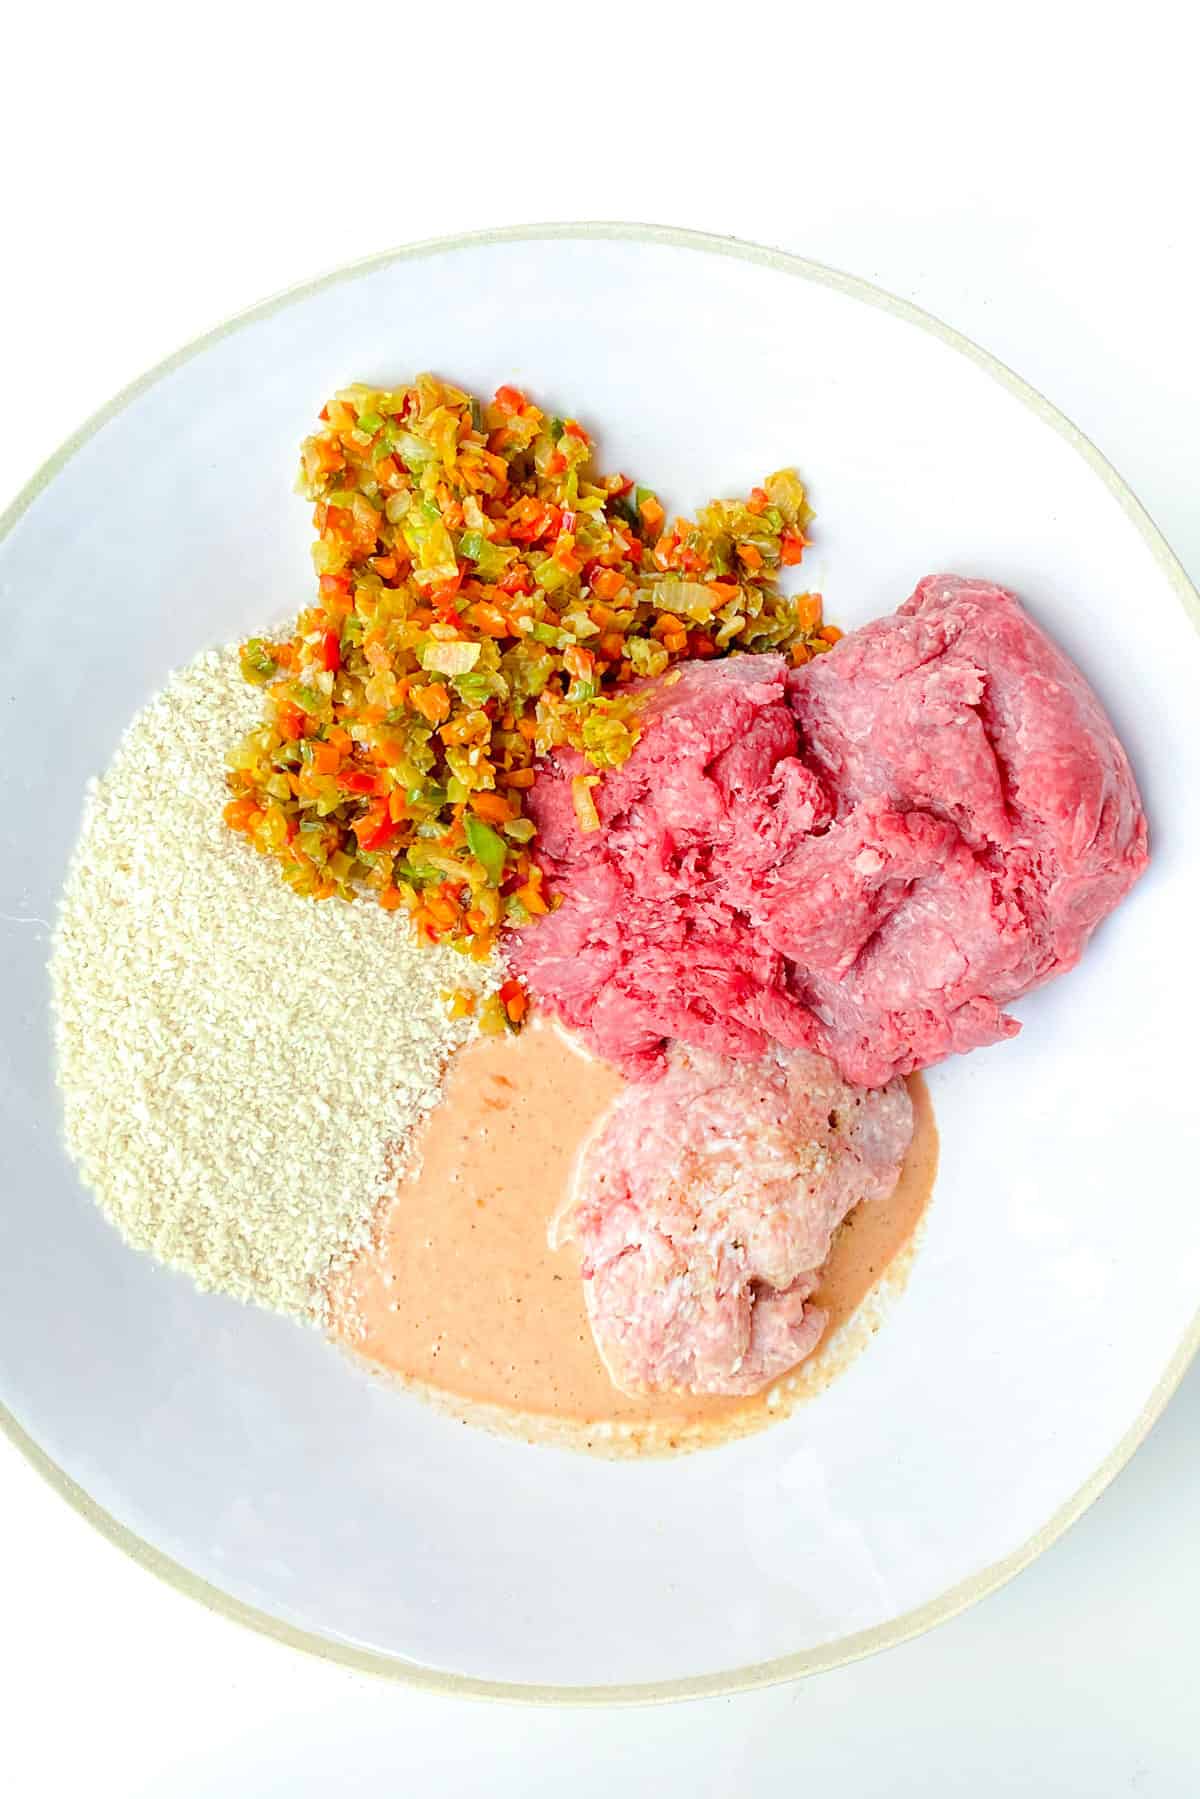 overhead shot of a white bowl filled with meatloaf ingredients: two kinds of ground meat, sauteed veggies, bread crumbs and a ketchup and cream mixture